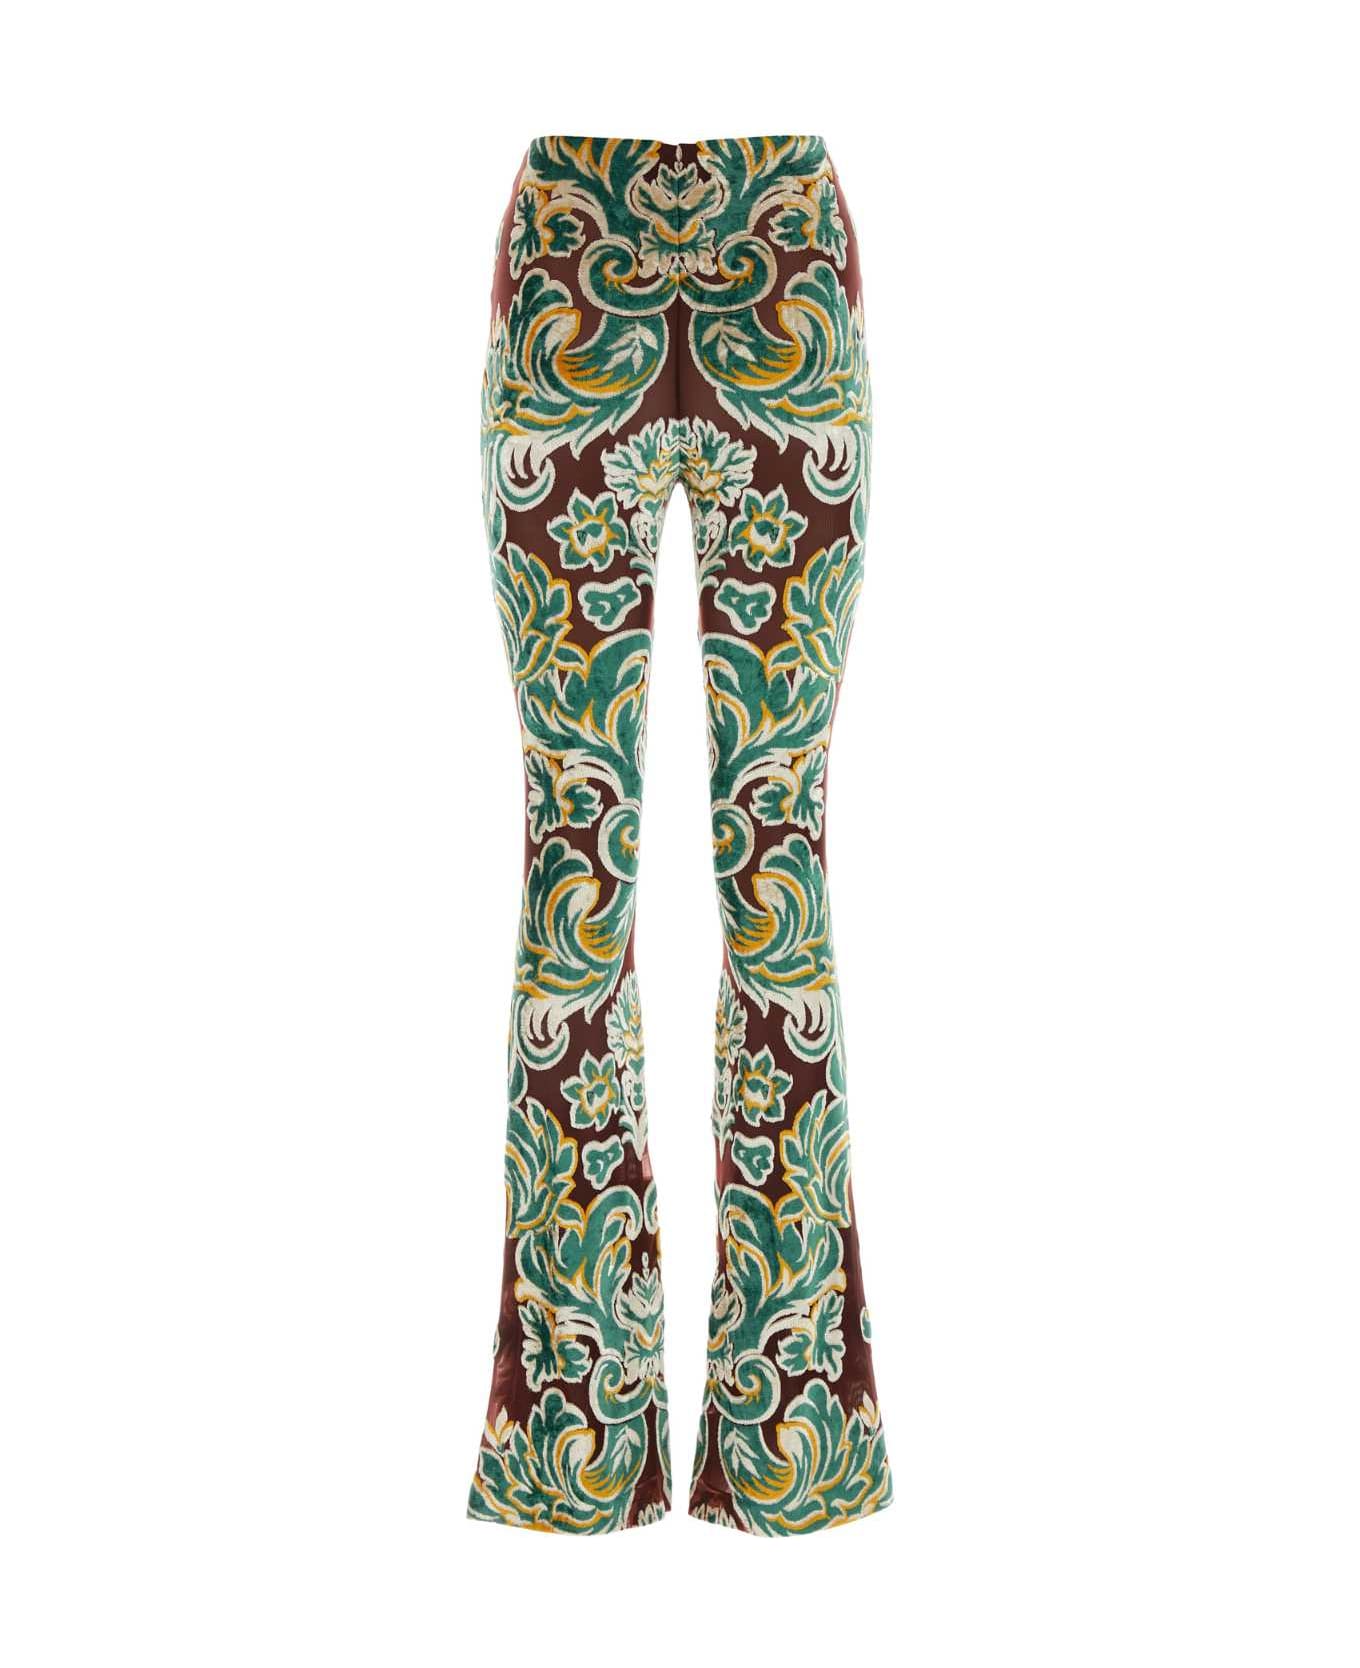 Etro Embroidered Jacquard Pant - S9865